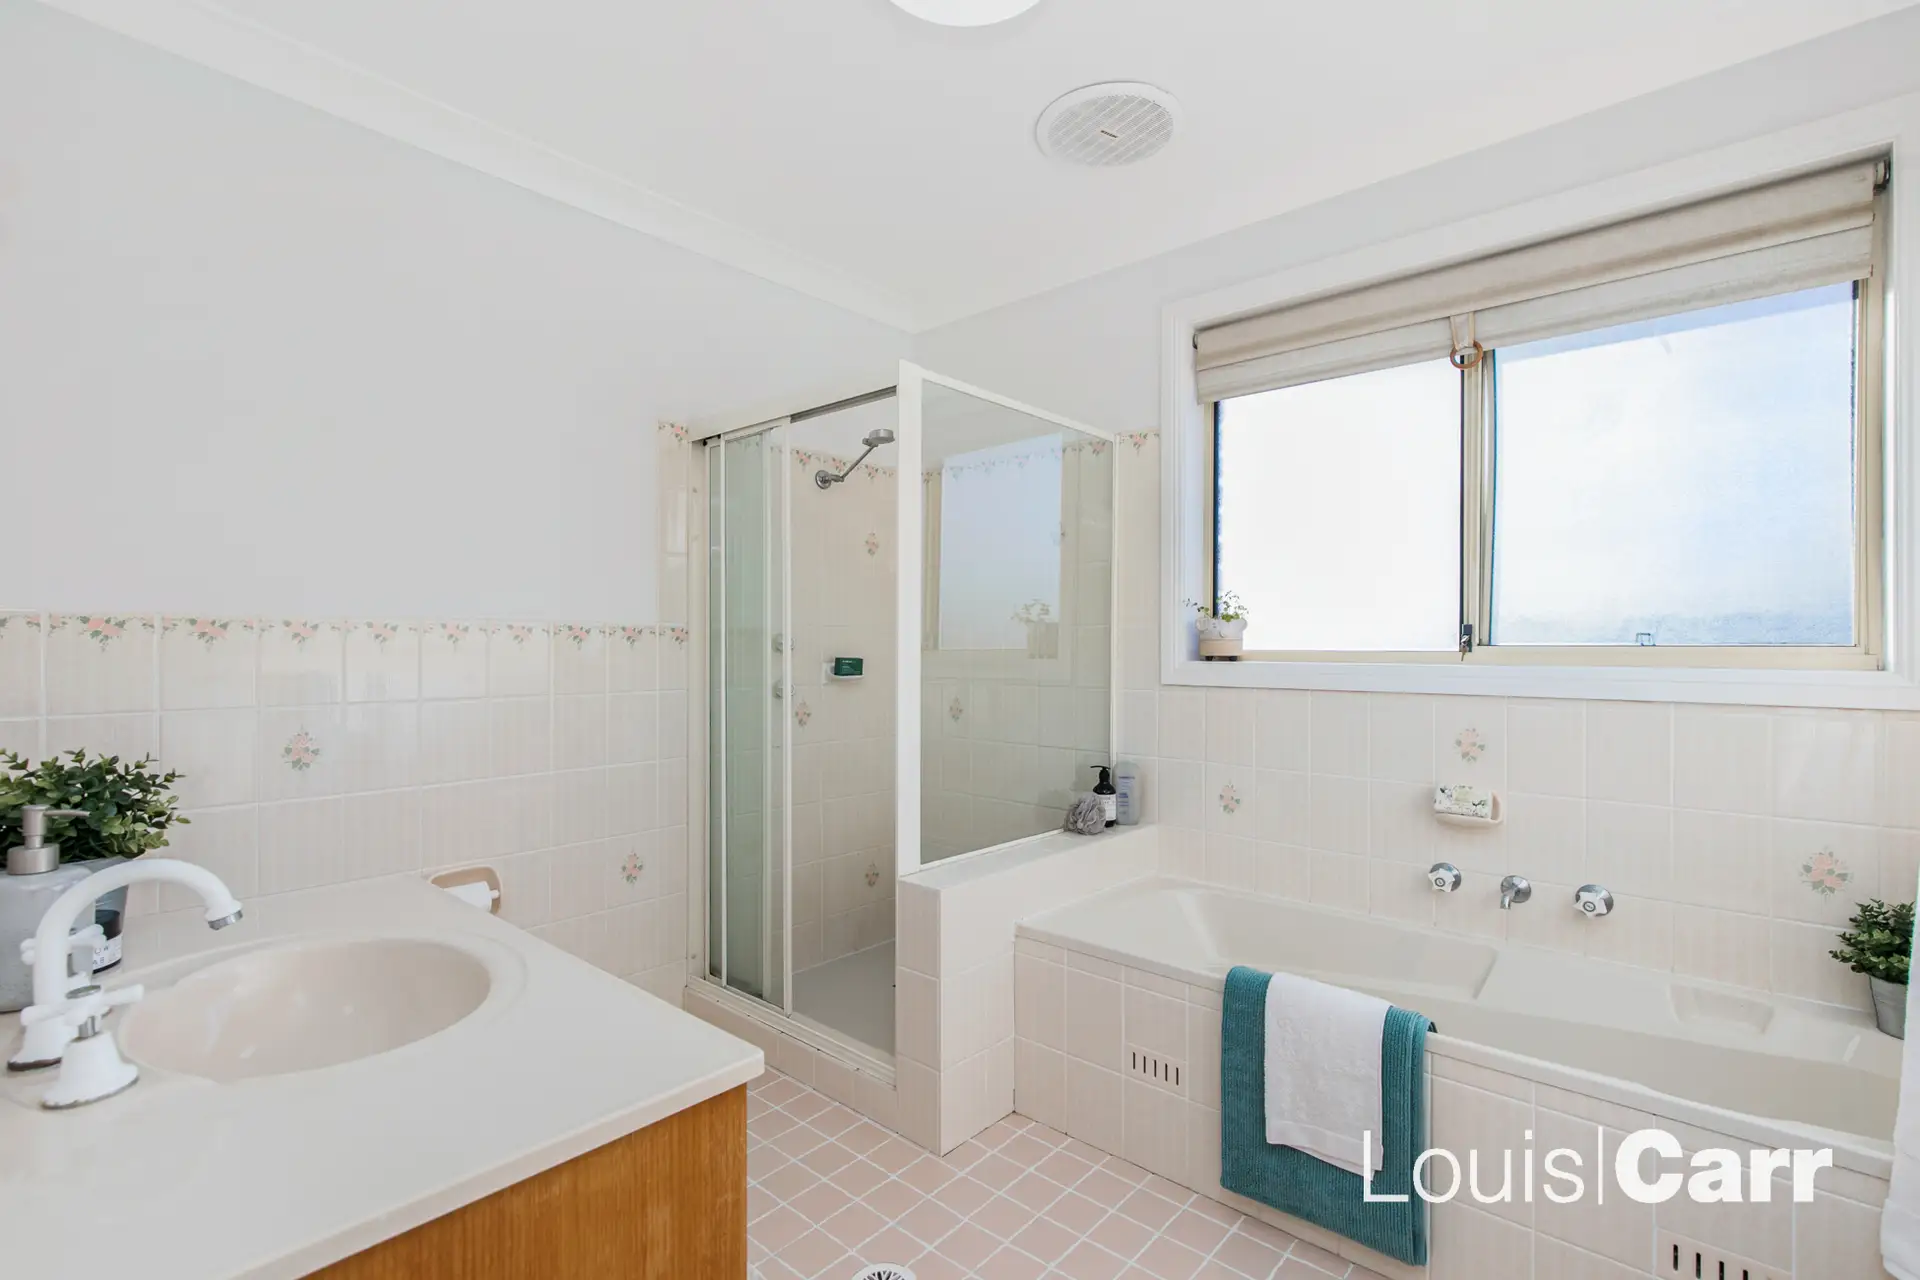 Photo #12: 16B Darlington Drive, Cherrybrook - Sold by Louis Carr Real Estate